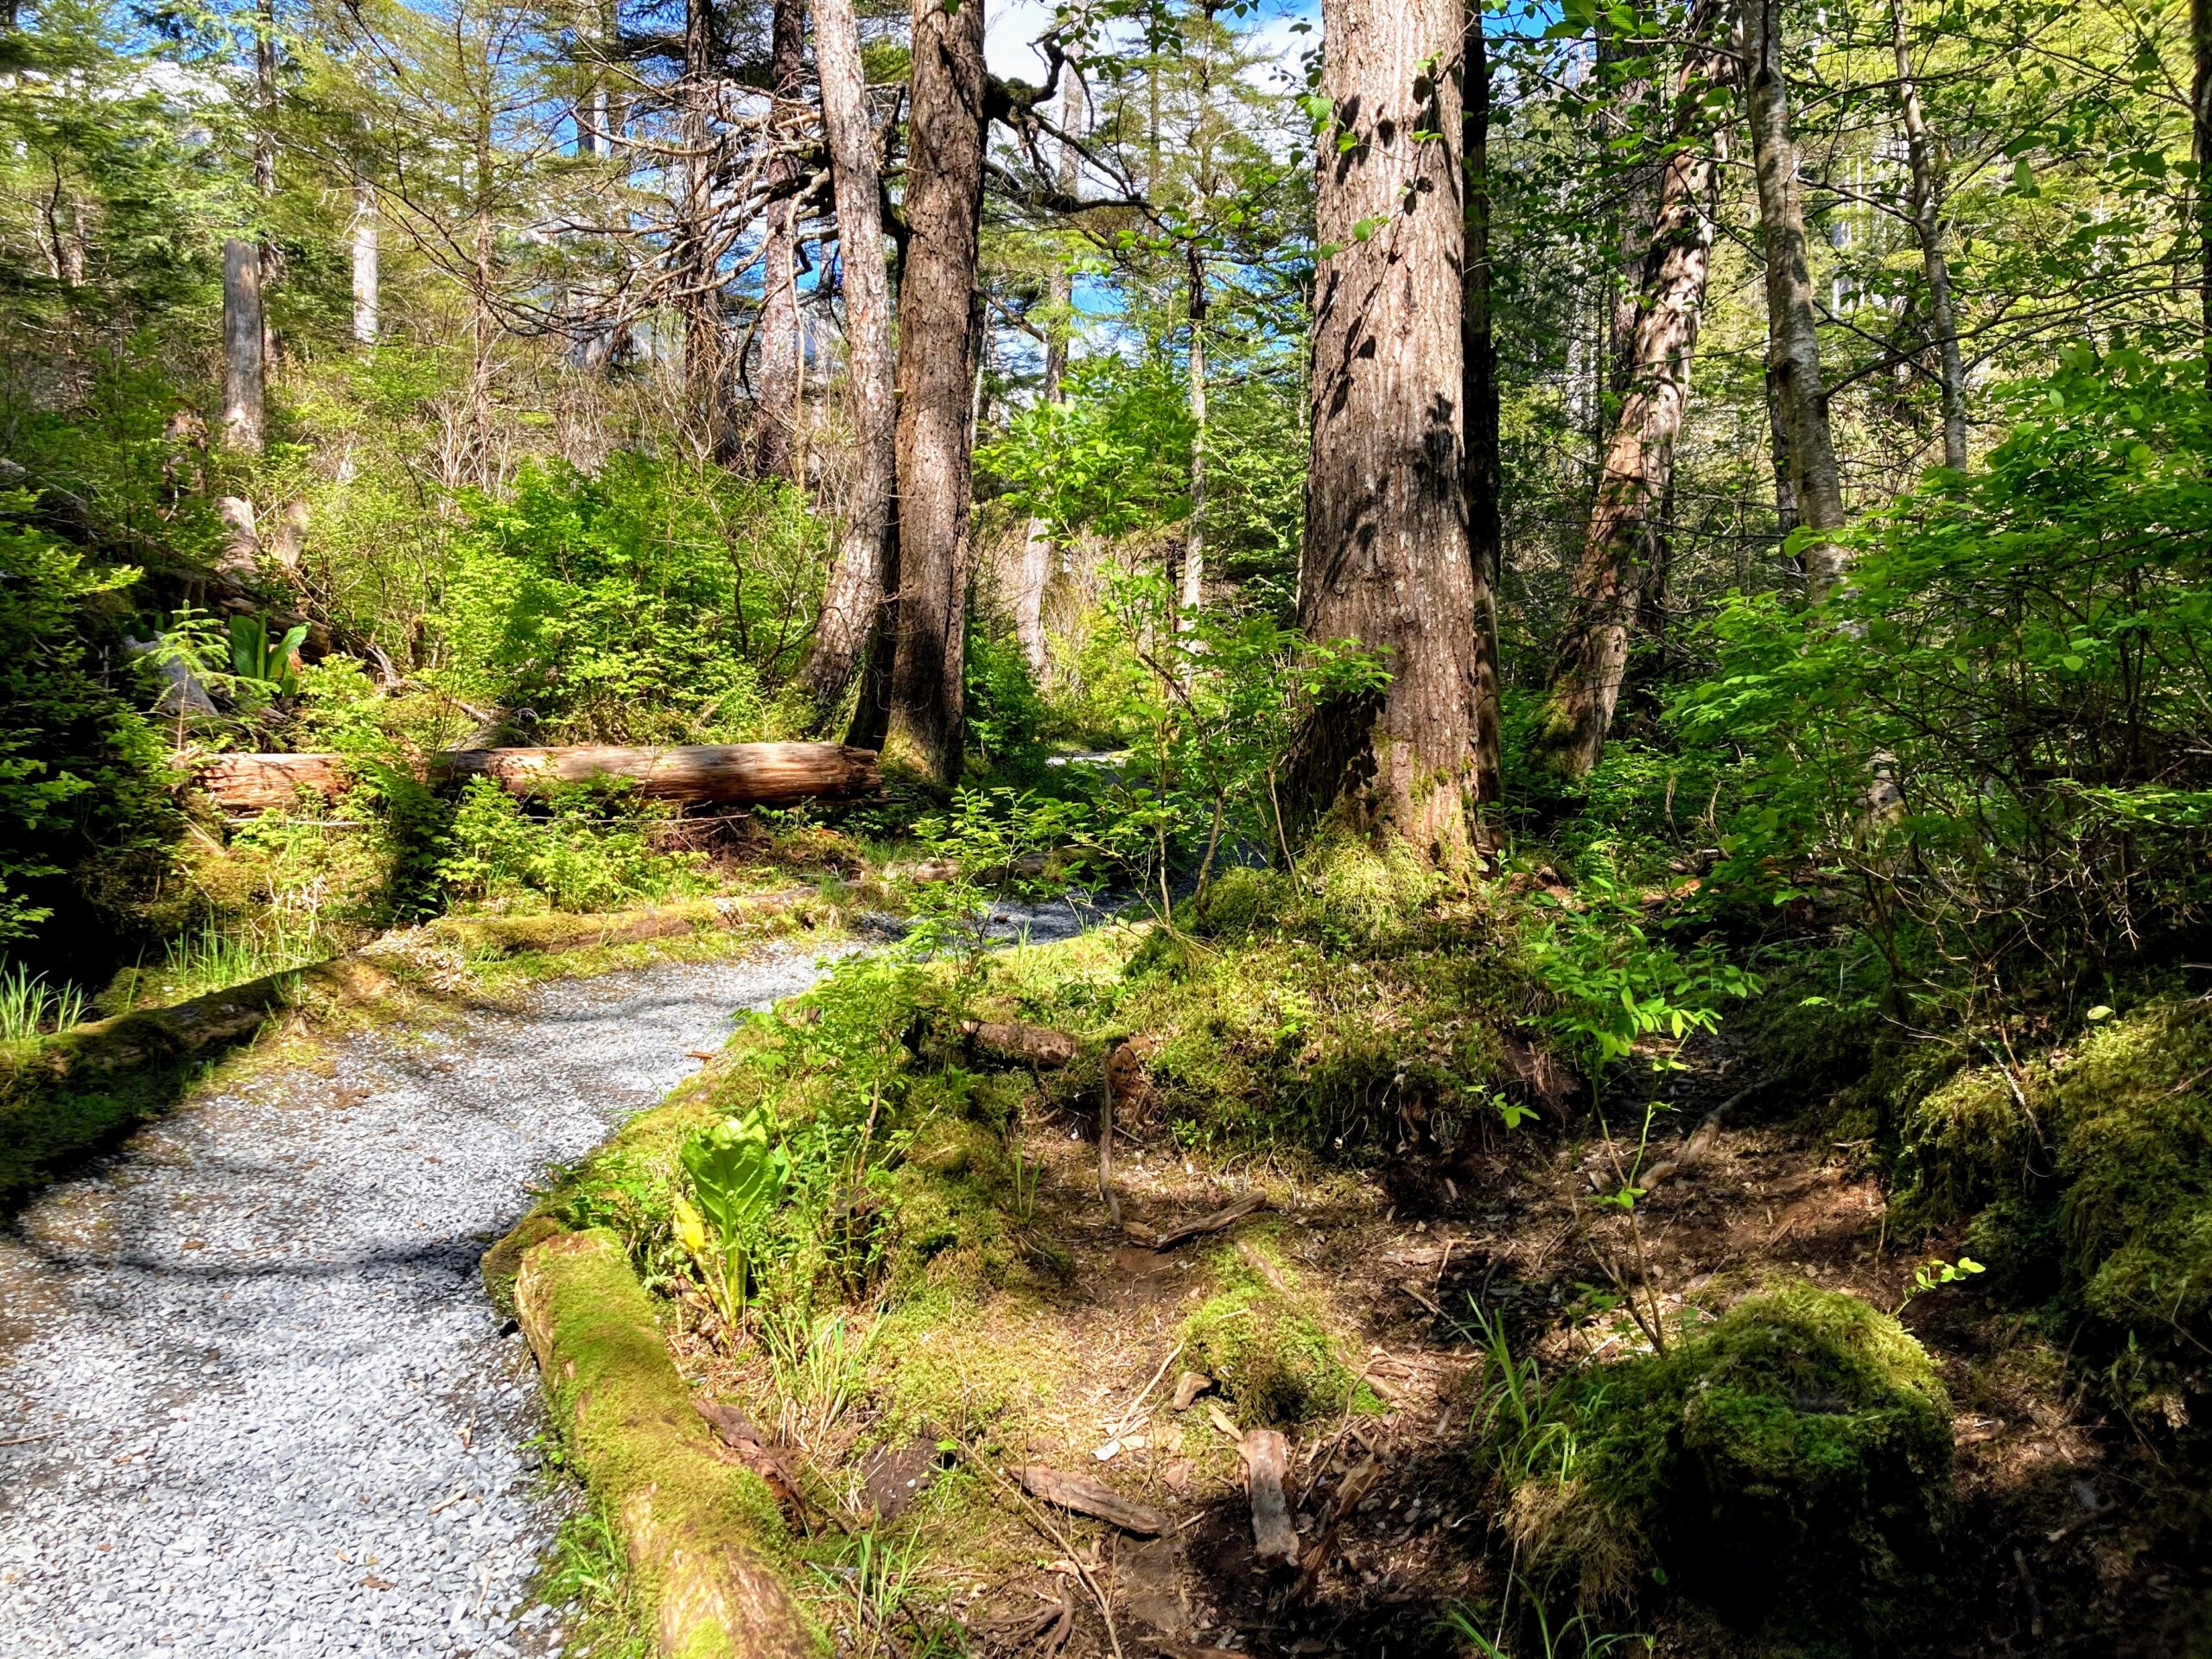 A wooded section of forest along the Thimbleberry/Heart Lake Trail.